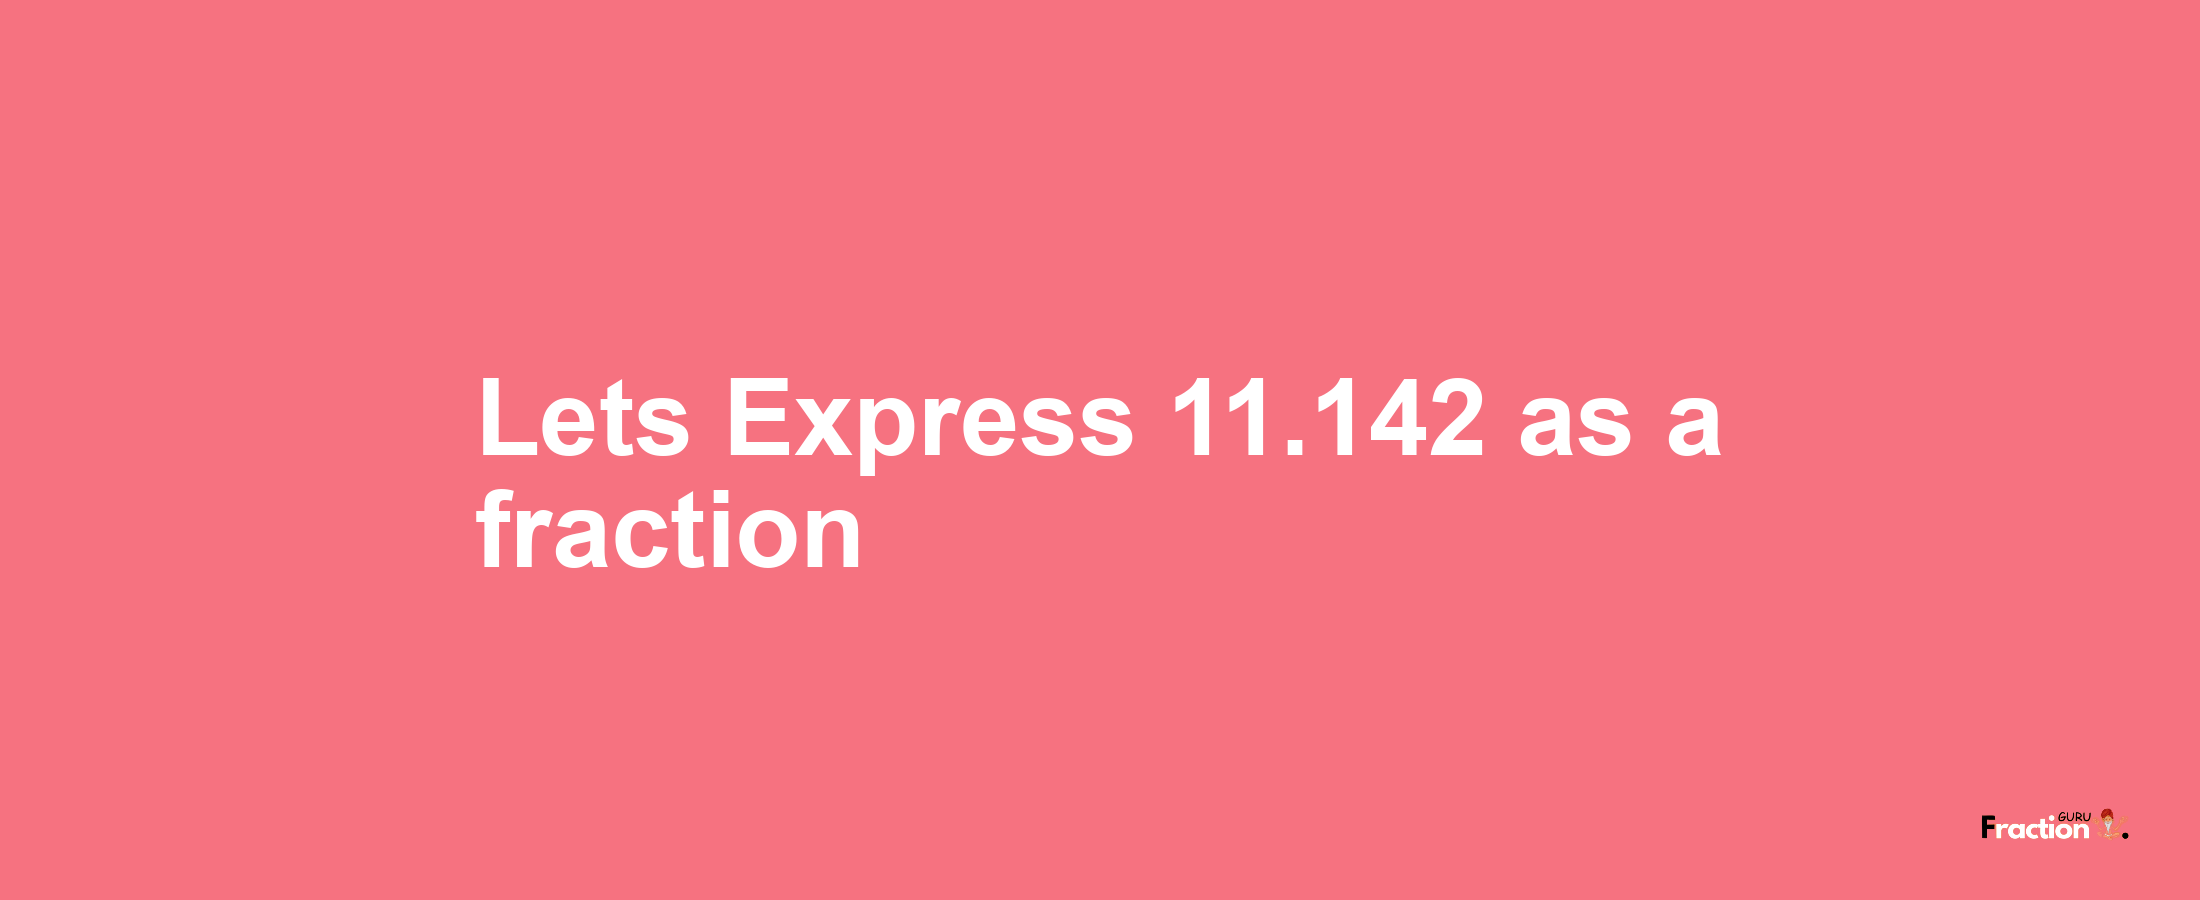 Lets Express 11.142 as afraction